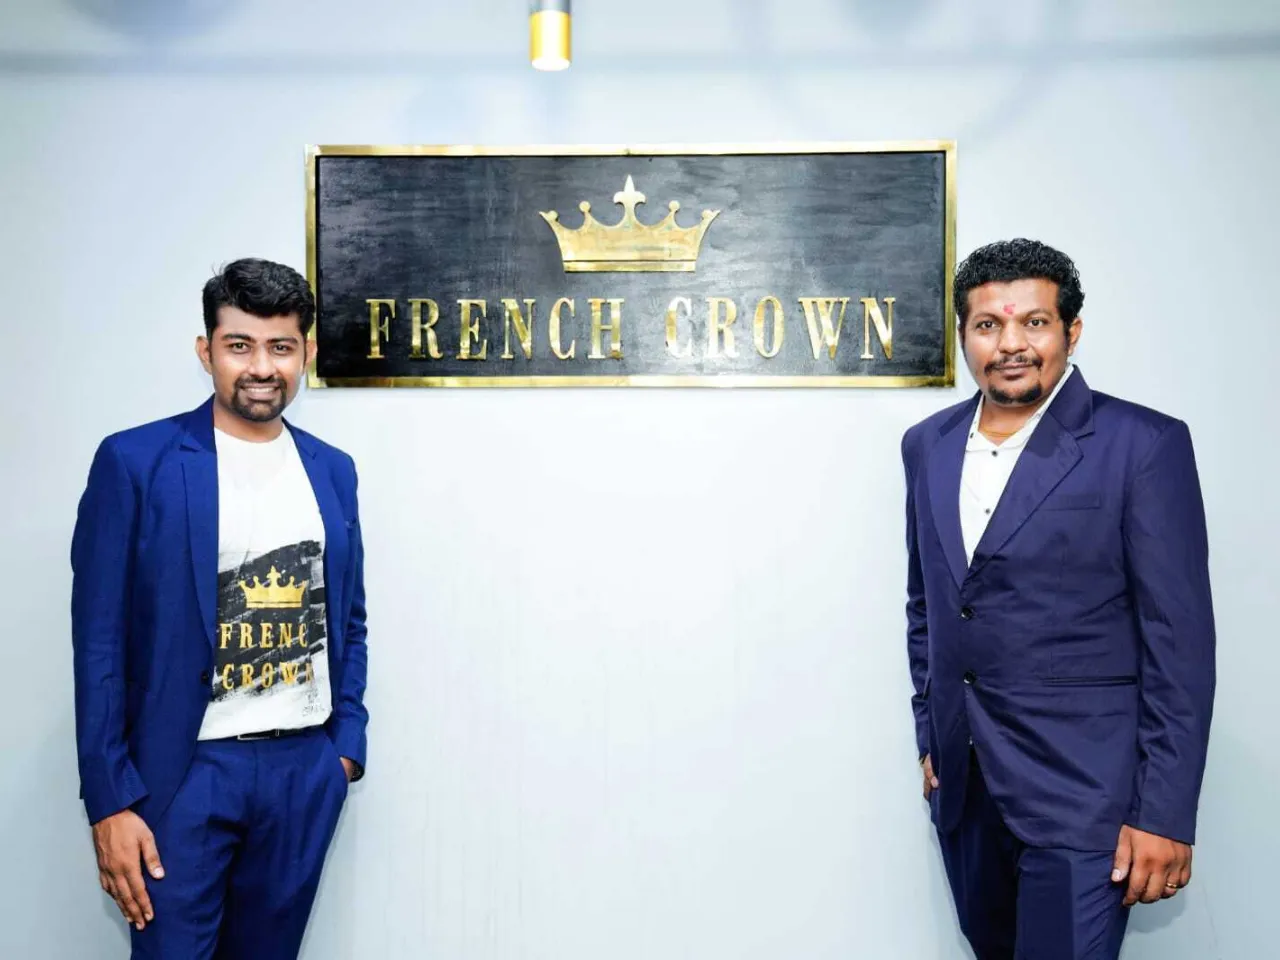 French Crown founders